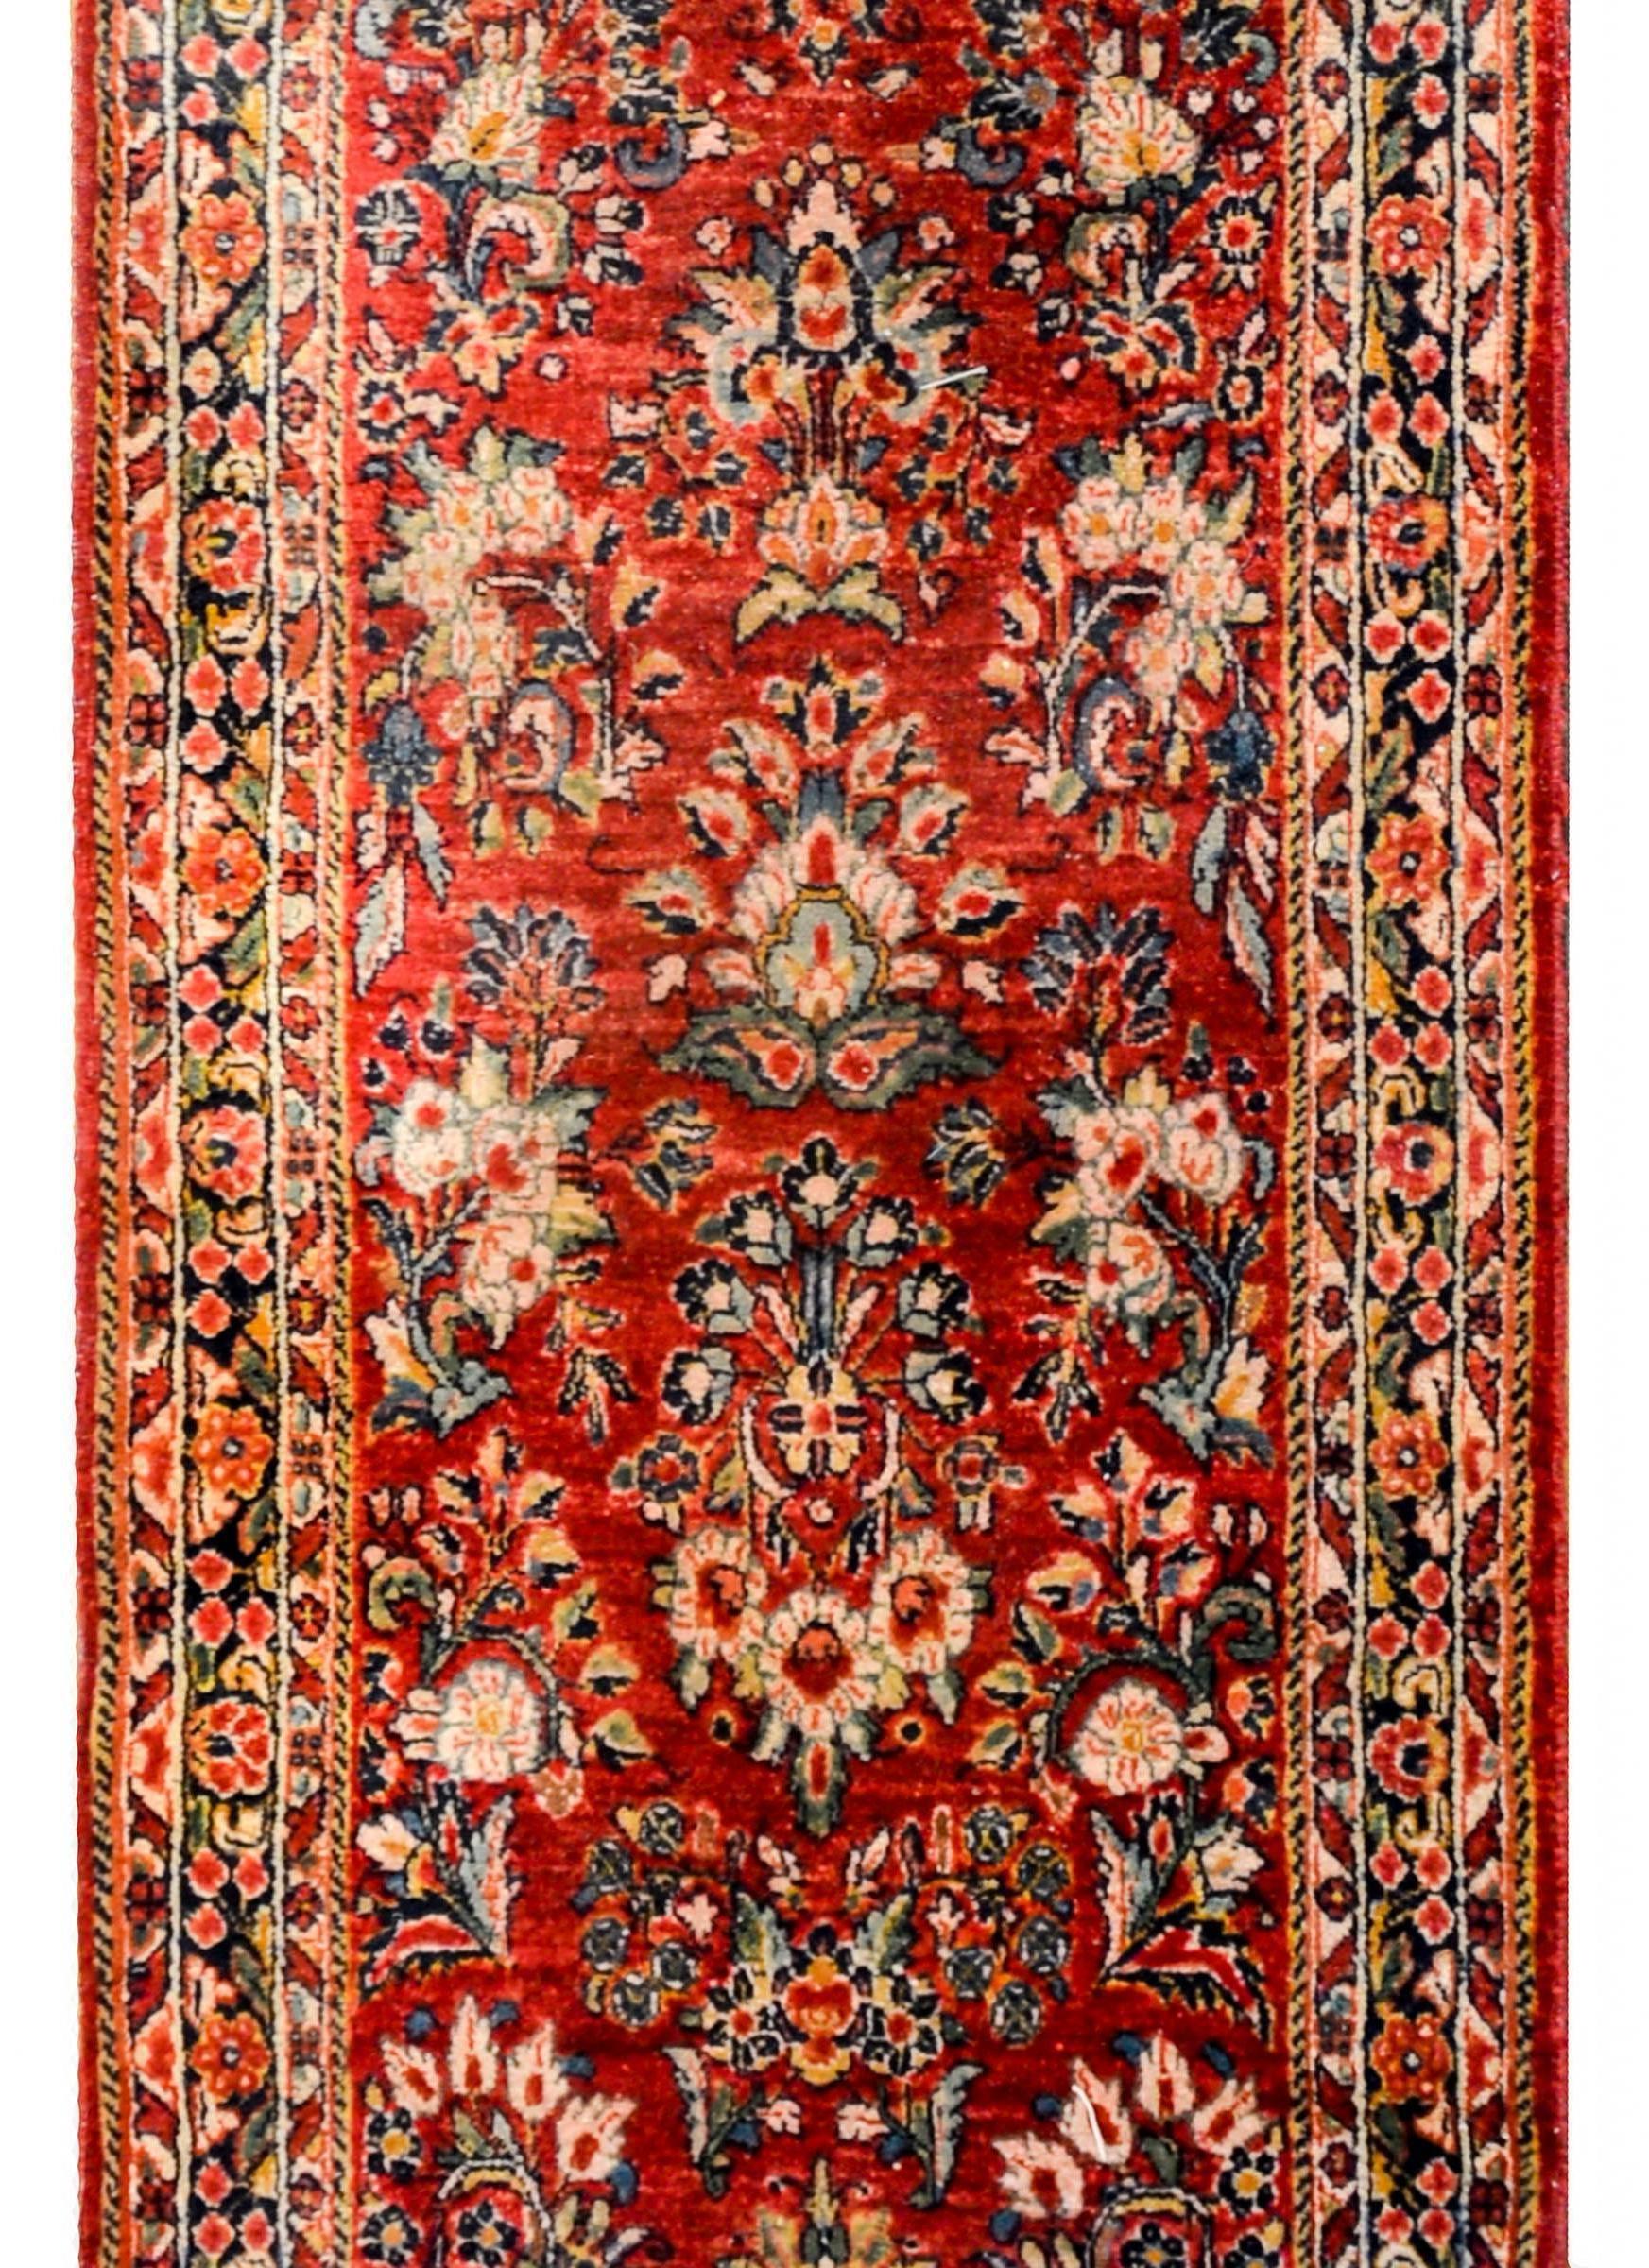 A beautiful early 20th century Persian Sarouk runner with a fantastic mirrored floral and vine pattern, expertly rendered, in light and dark indigo, salmon, gold, on a bold crimson background. The border is wide, with multiple floral and stylized